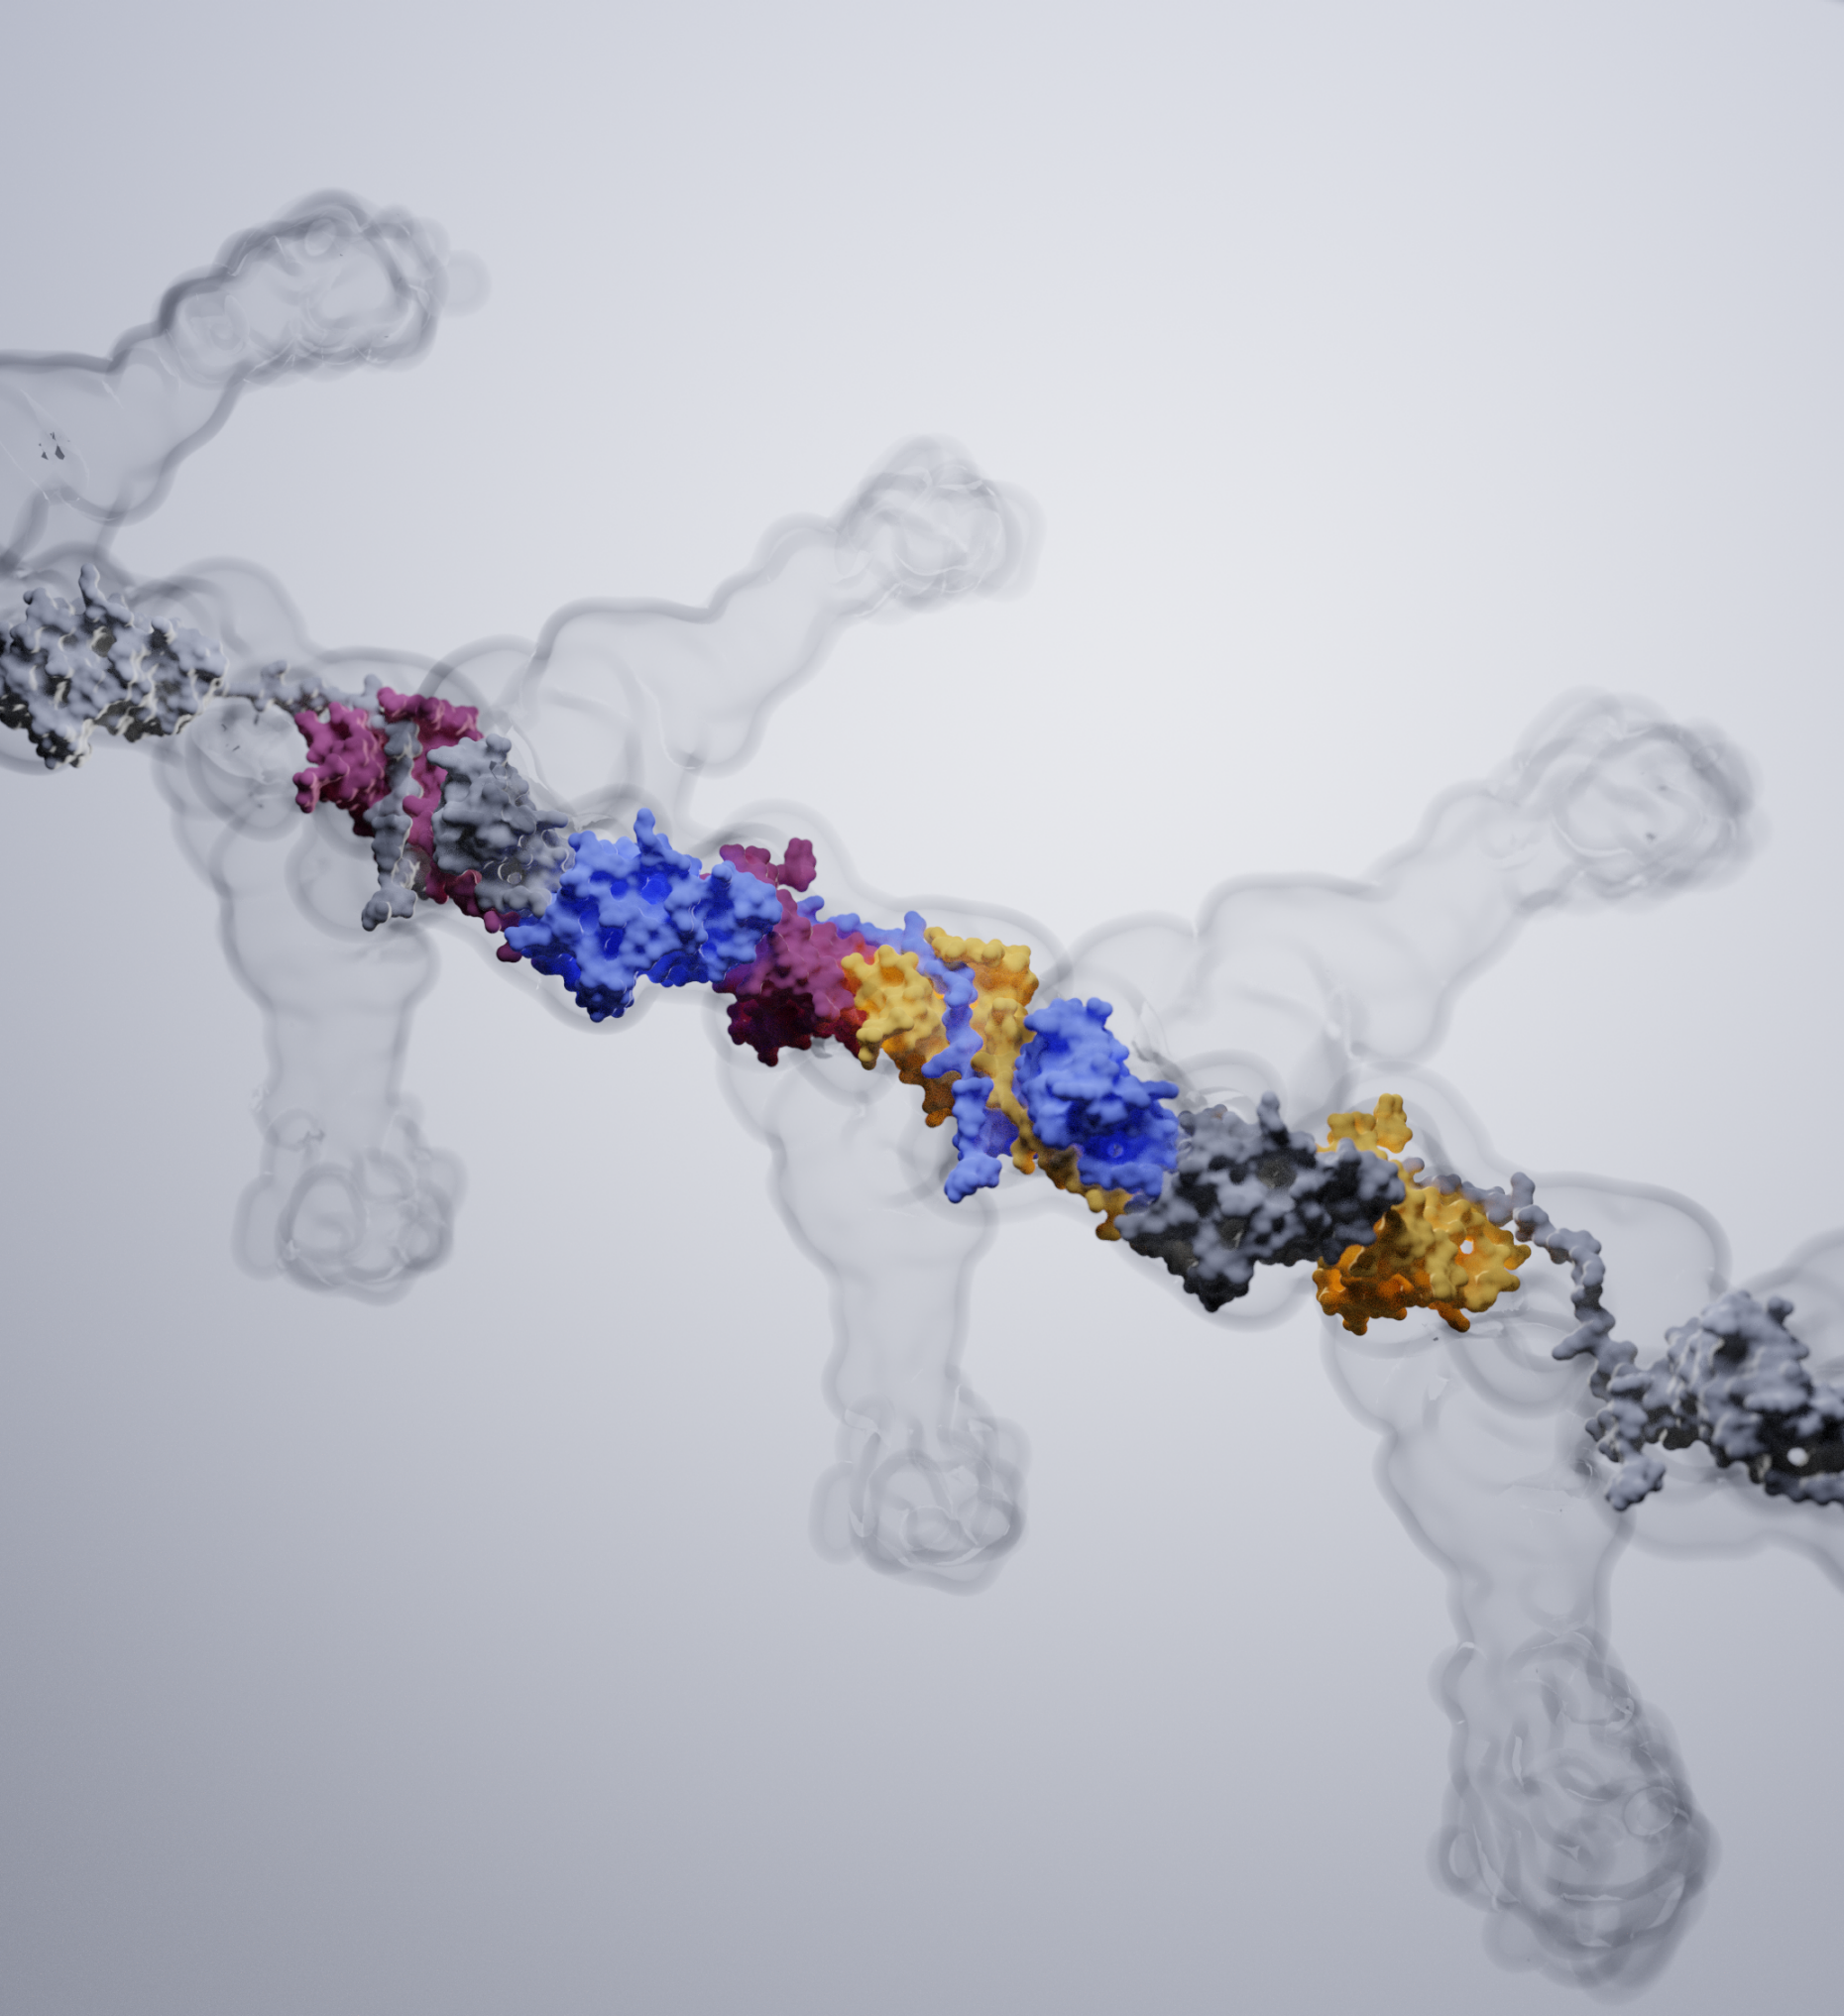 Visualization of the cryo-EM structure of human uromodulin